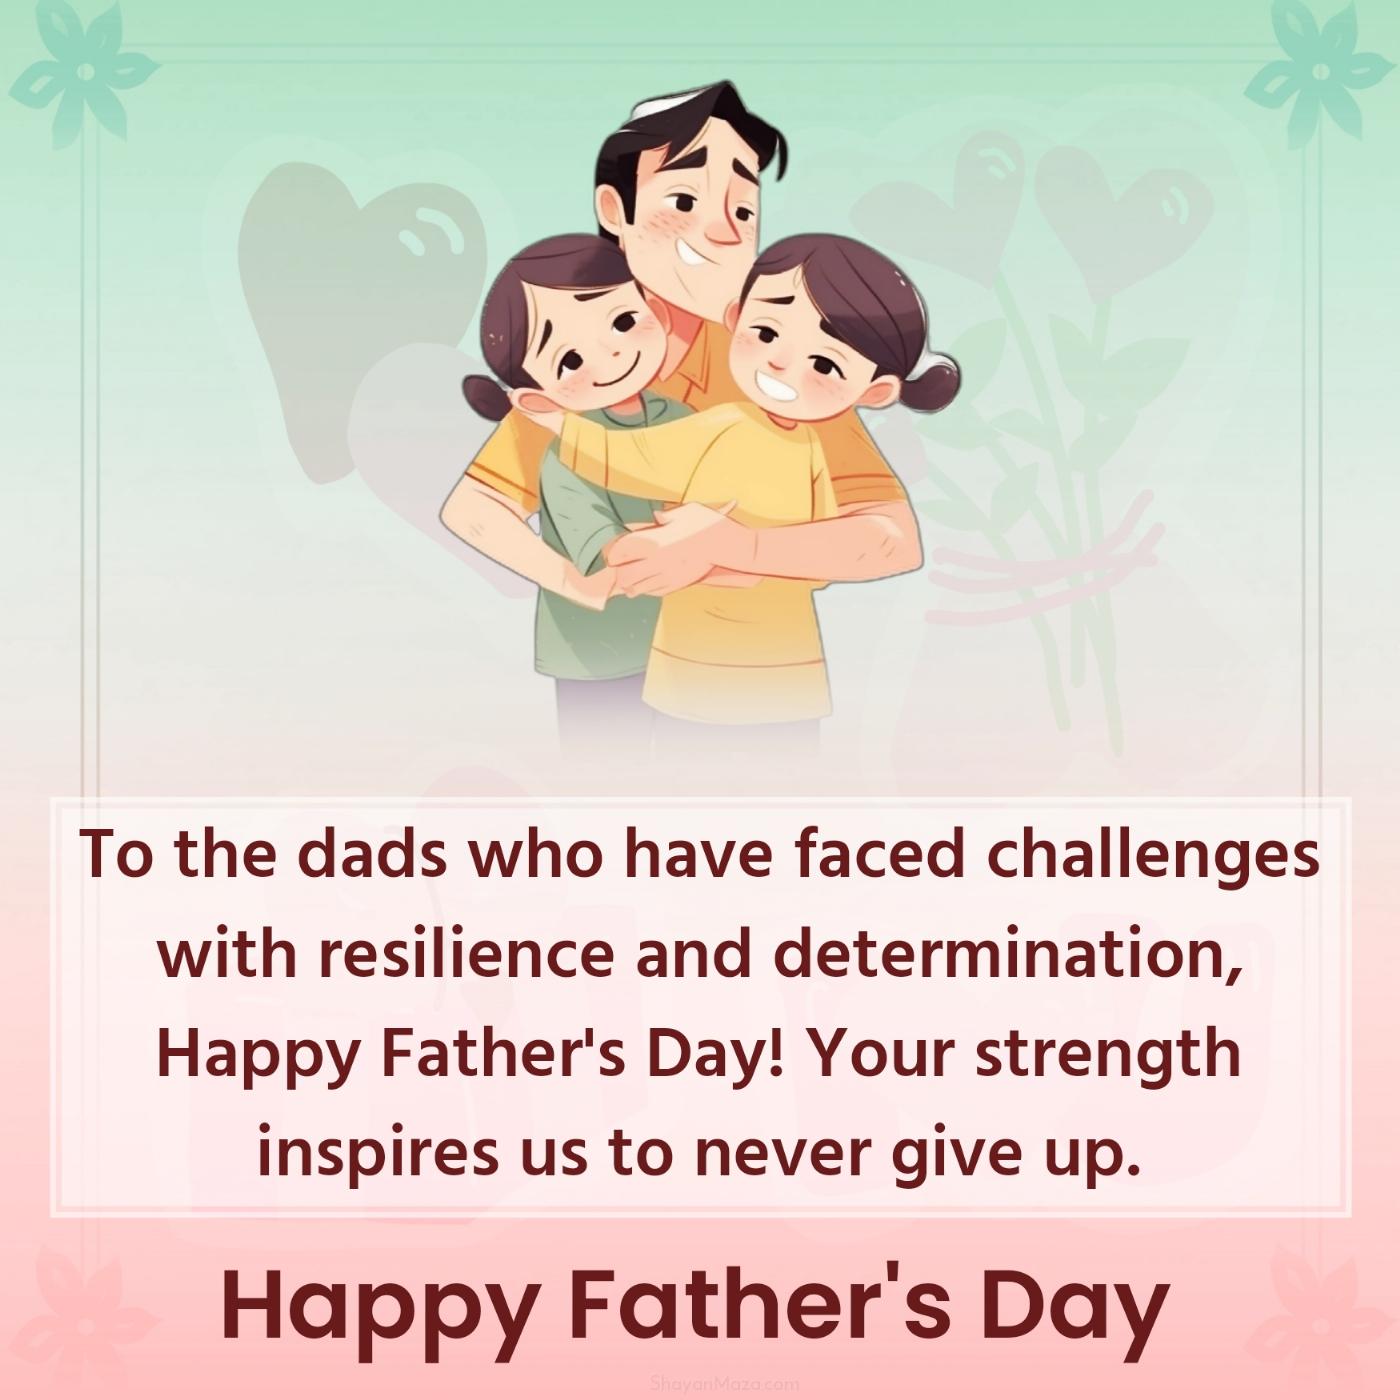 To the dads who have faced challenges with resilience and determination